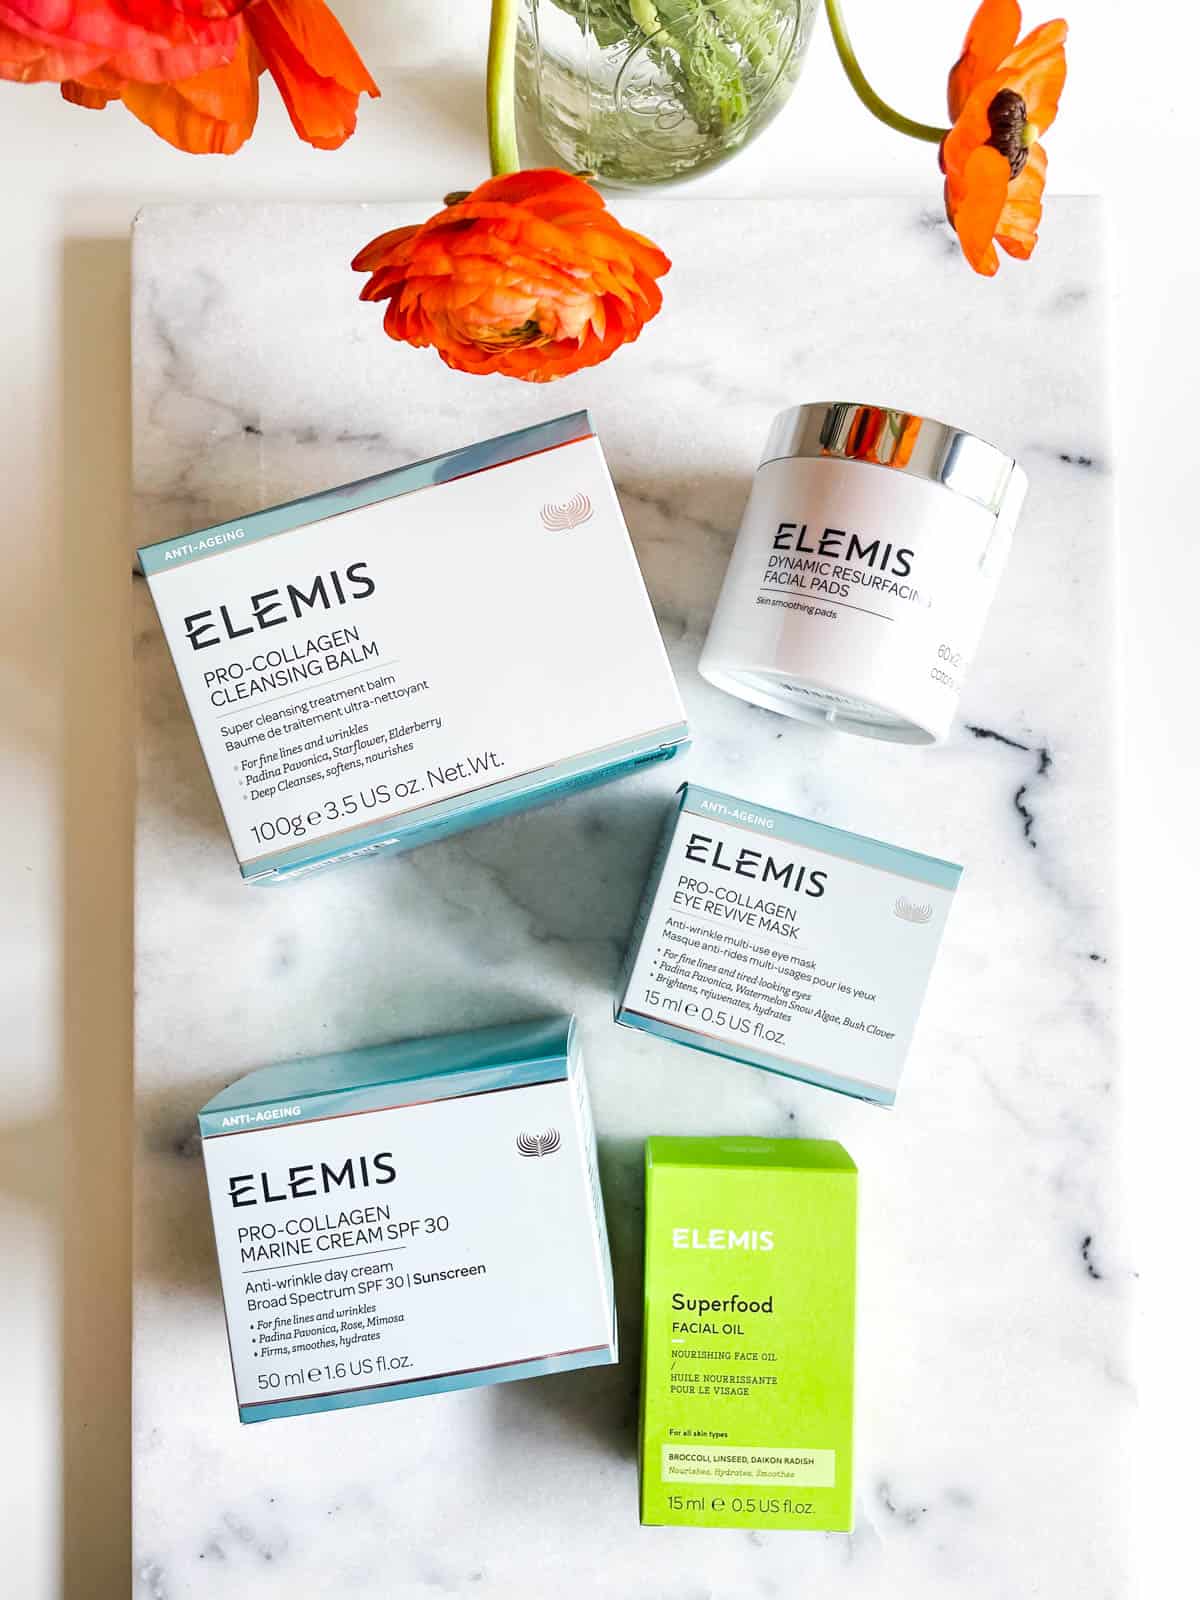 Overhead view of Elemis Skincare products in their boxes on a marble table.